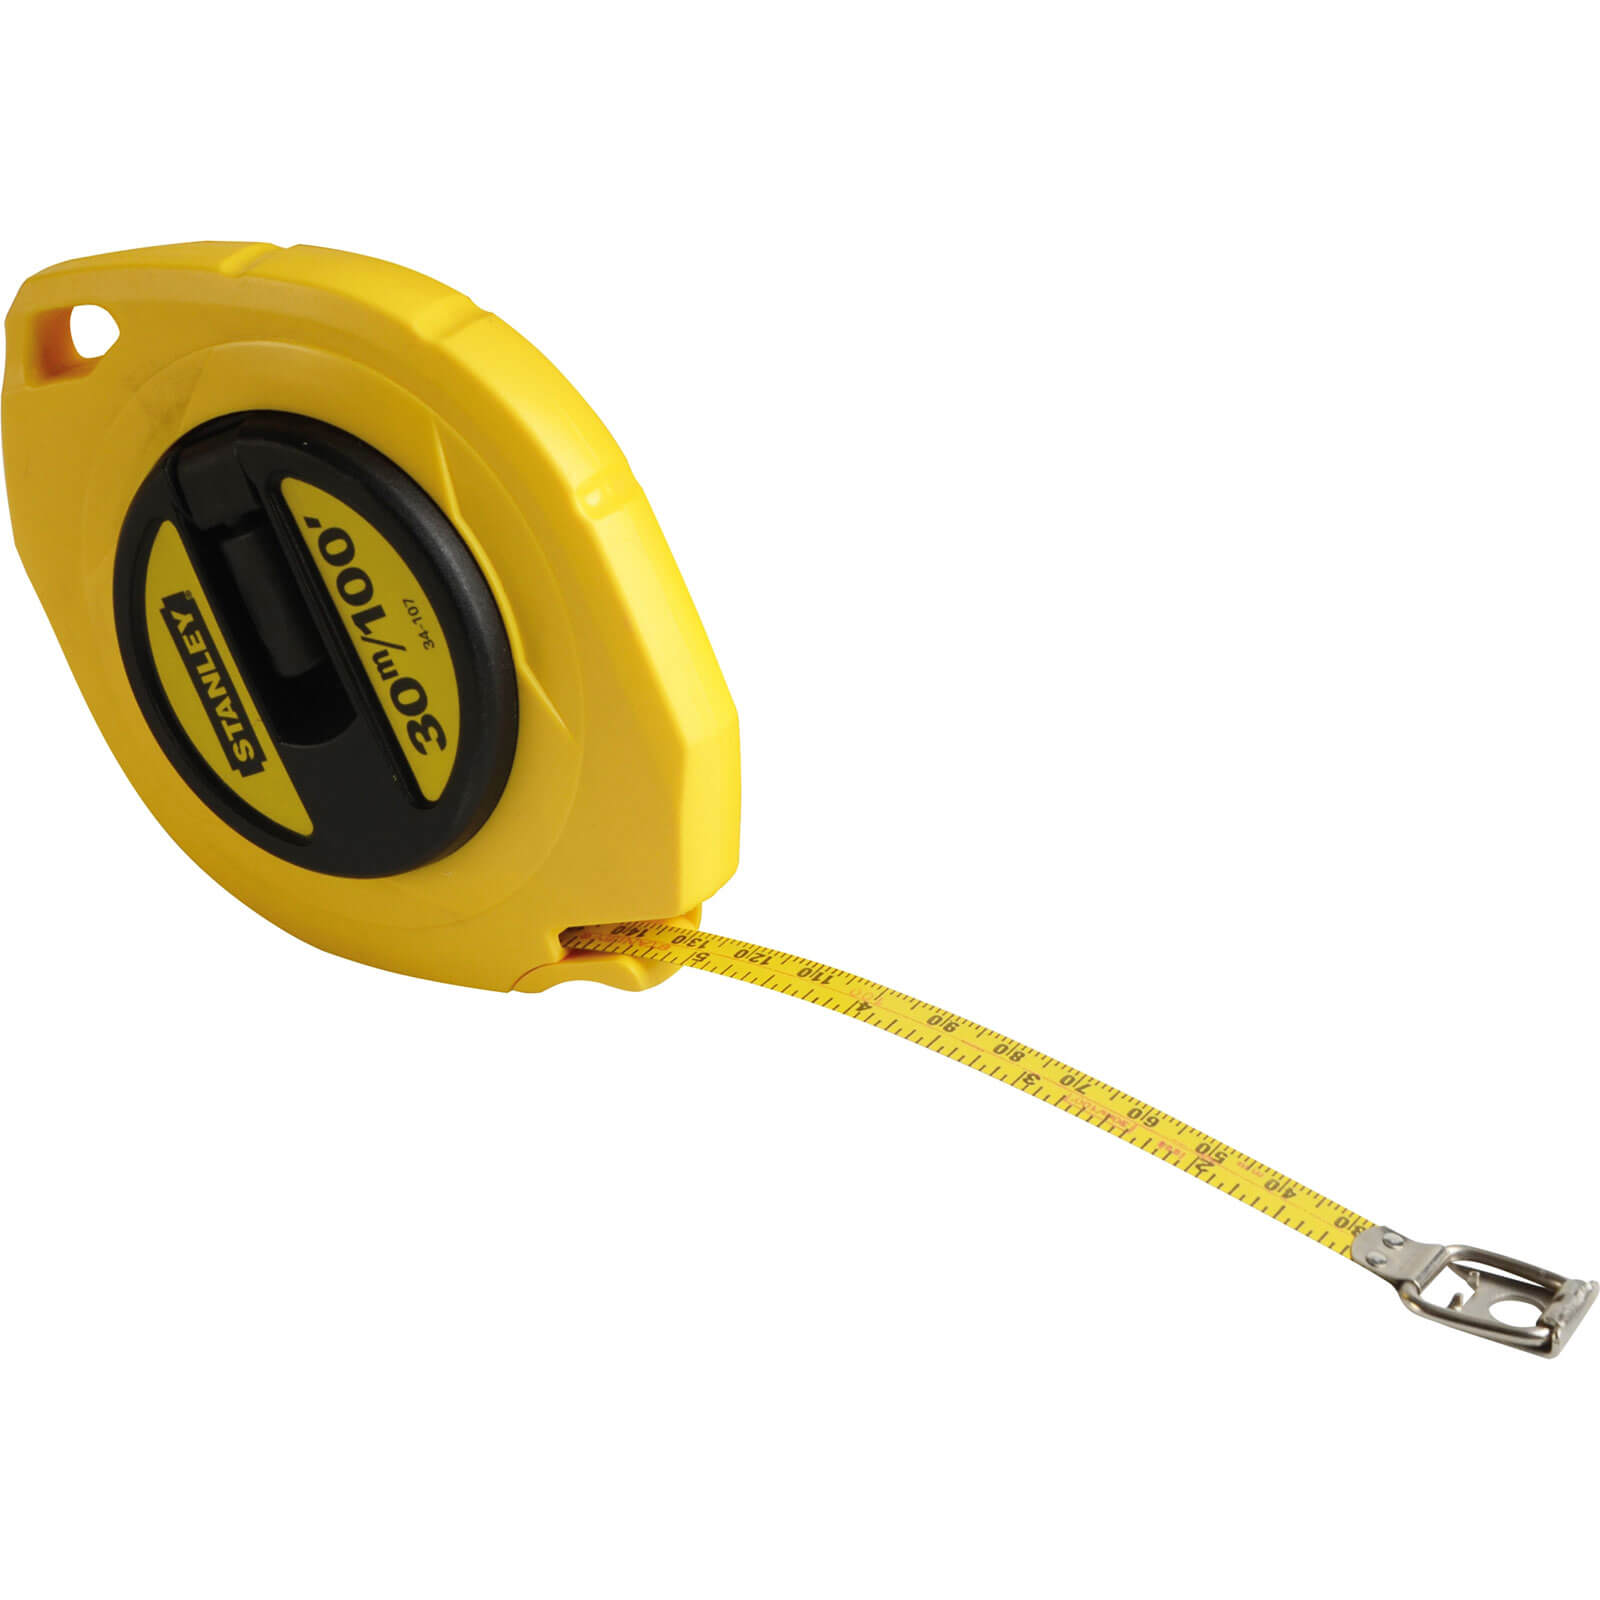 Photo of Stanley Closed Case Steel Tape Measure Imperial & Metric 100ft / 30m 9.5mm